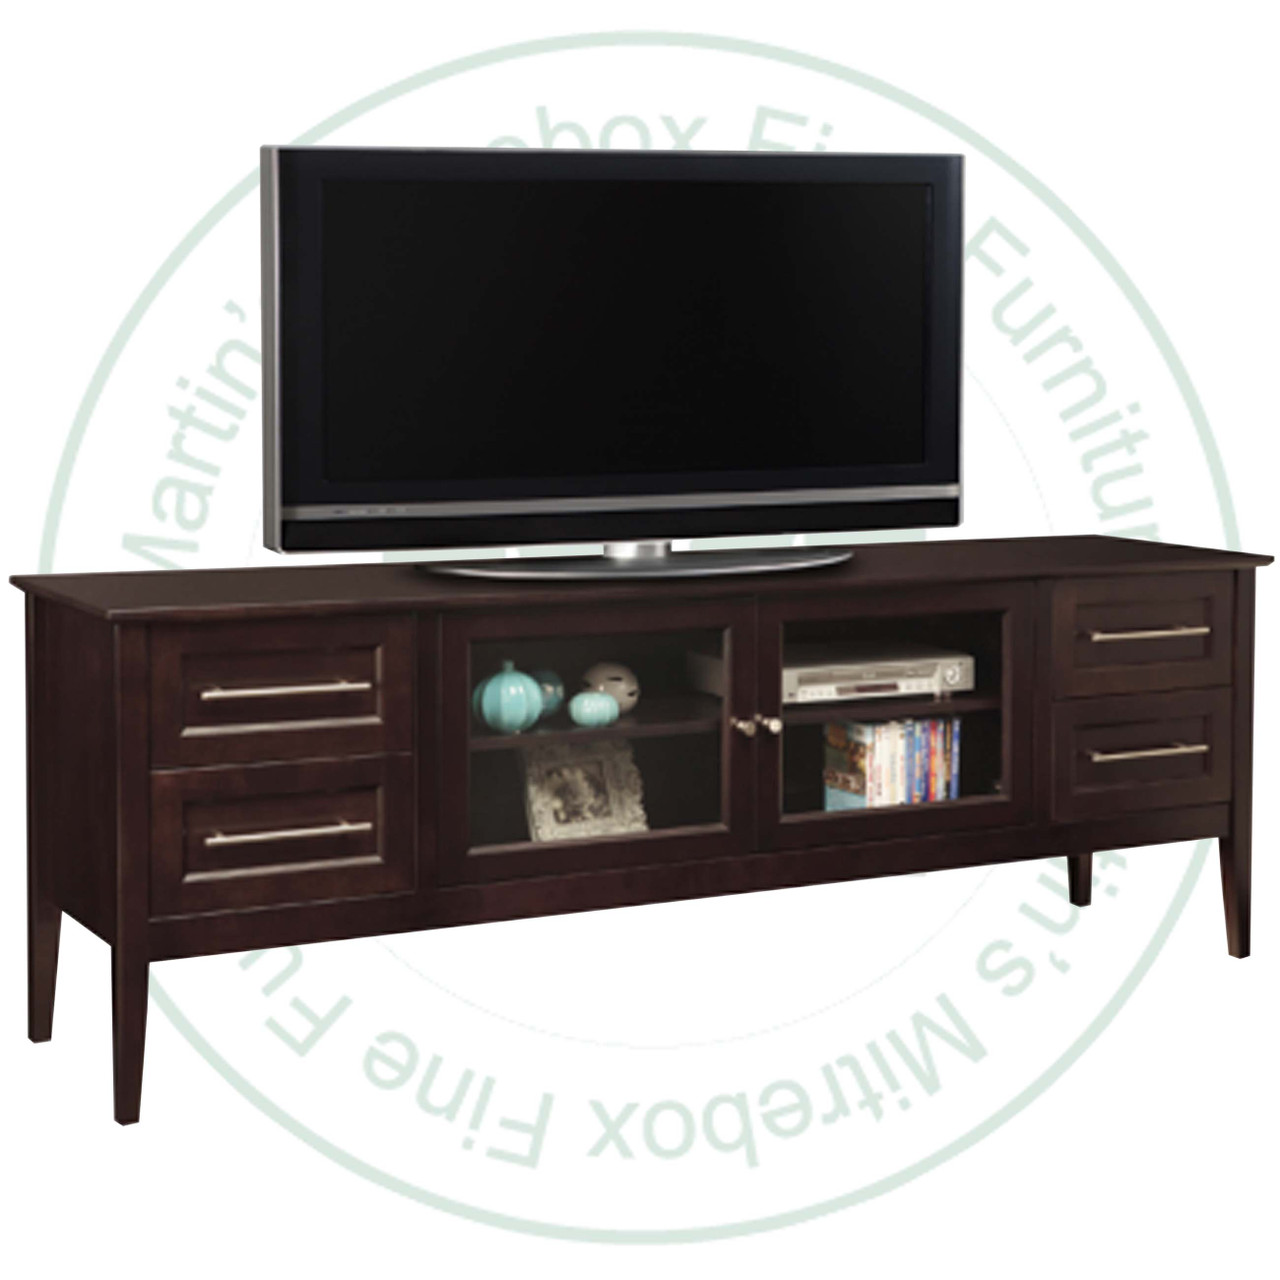 Wormy Maple Stockholm 84" HDTV Cabinet